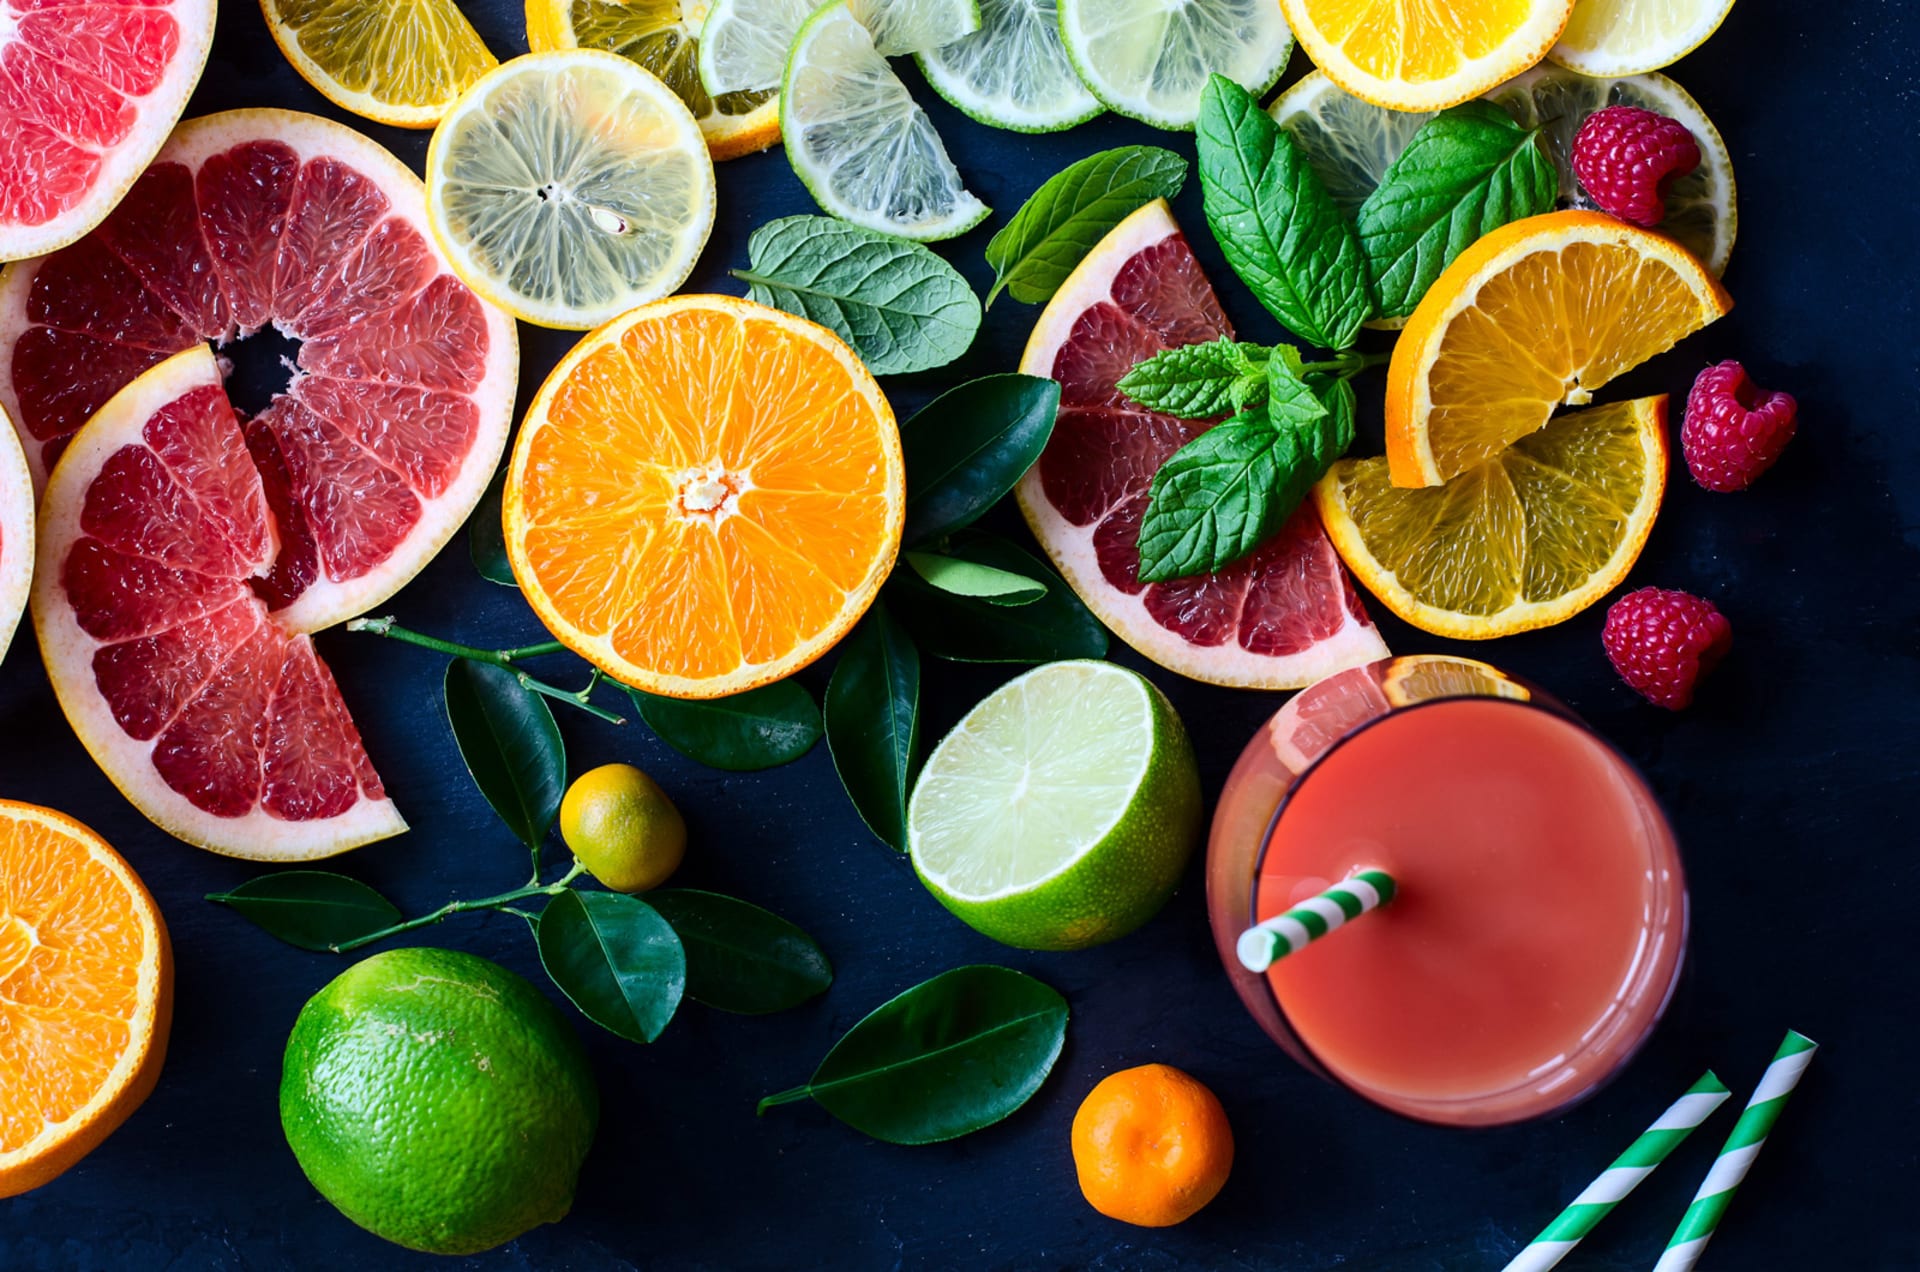 AEB citrus juice enzymes for processing, biotechnology enzyme formulations